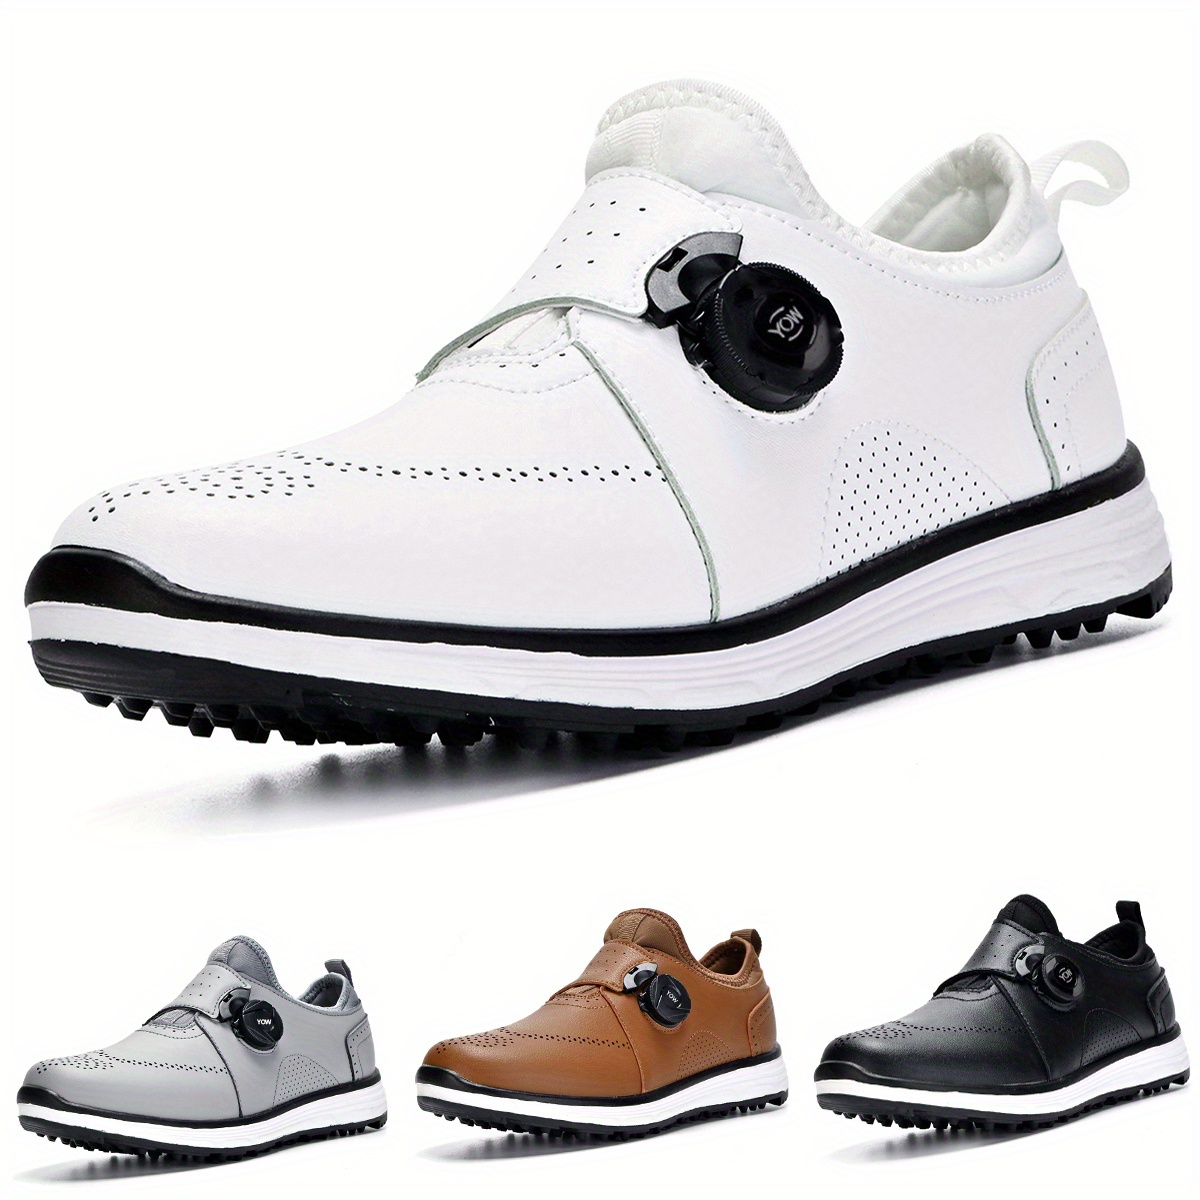 mens professional breathable golf shoes with non slip rotary buckle perfect for training details 1